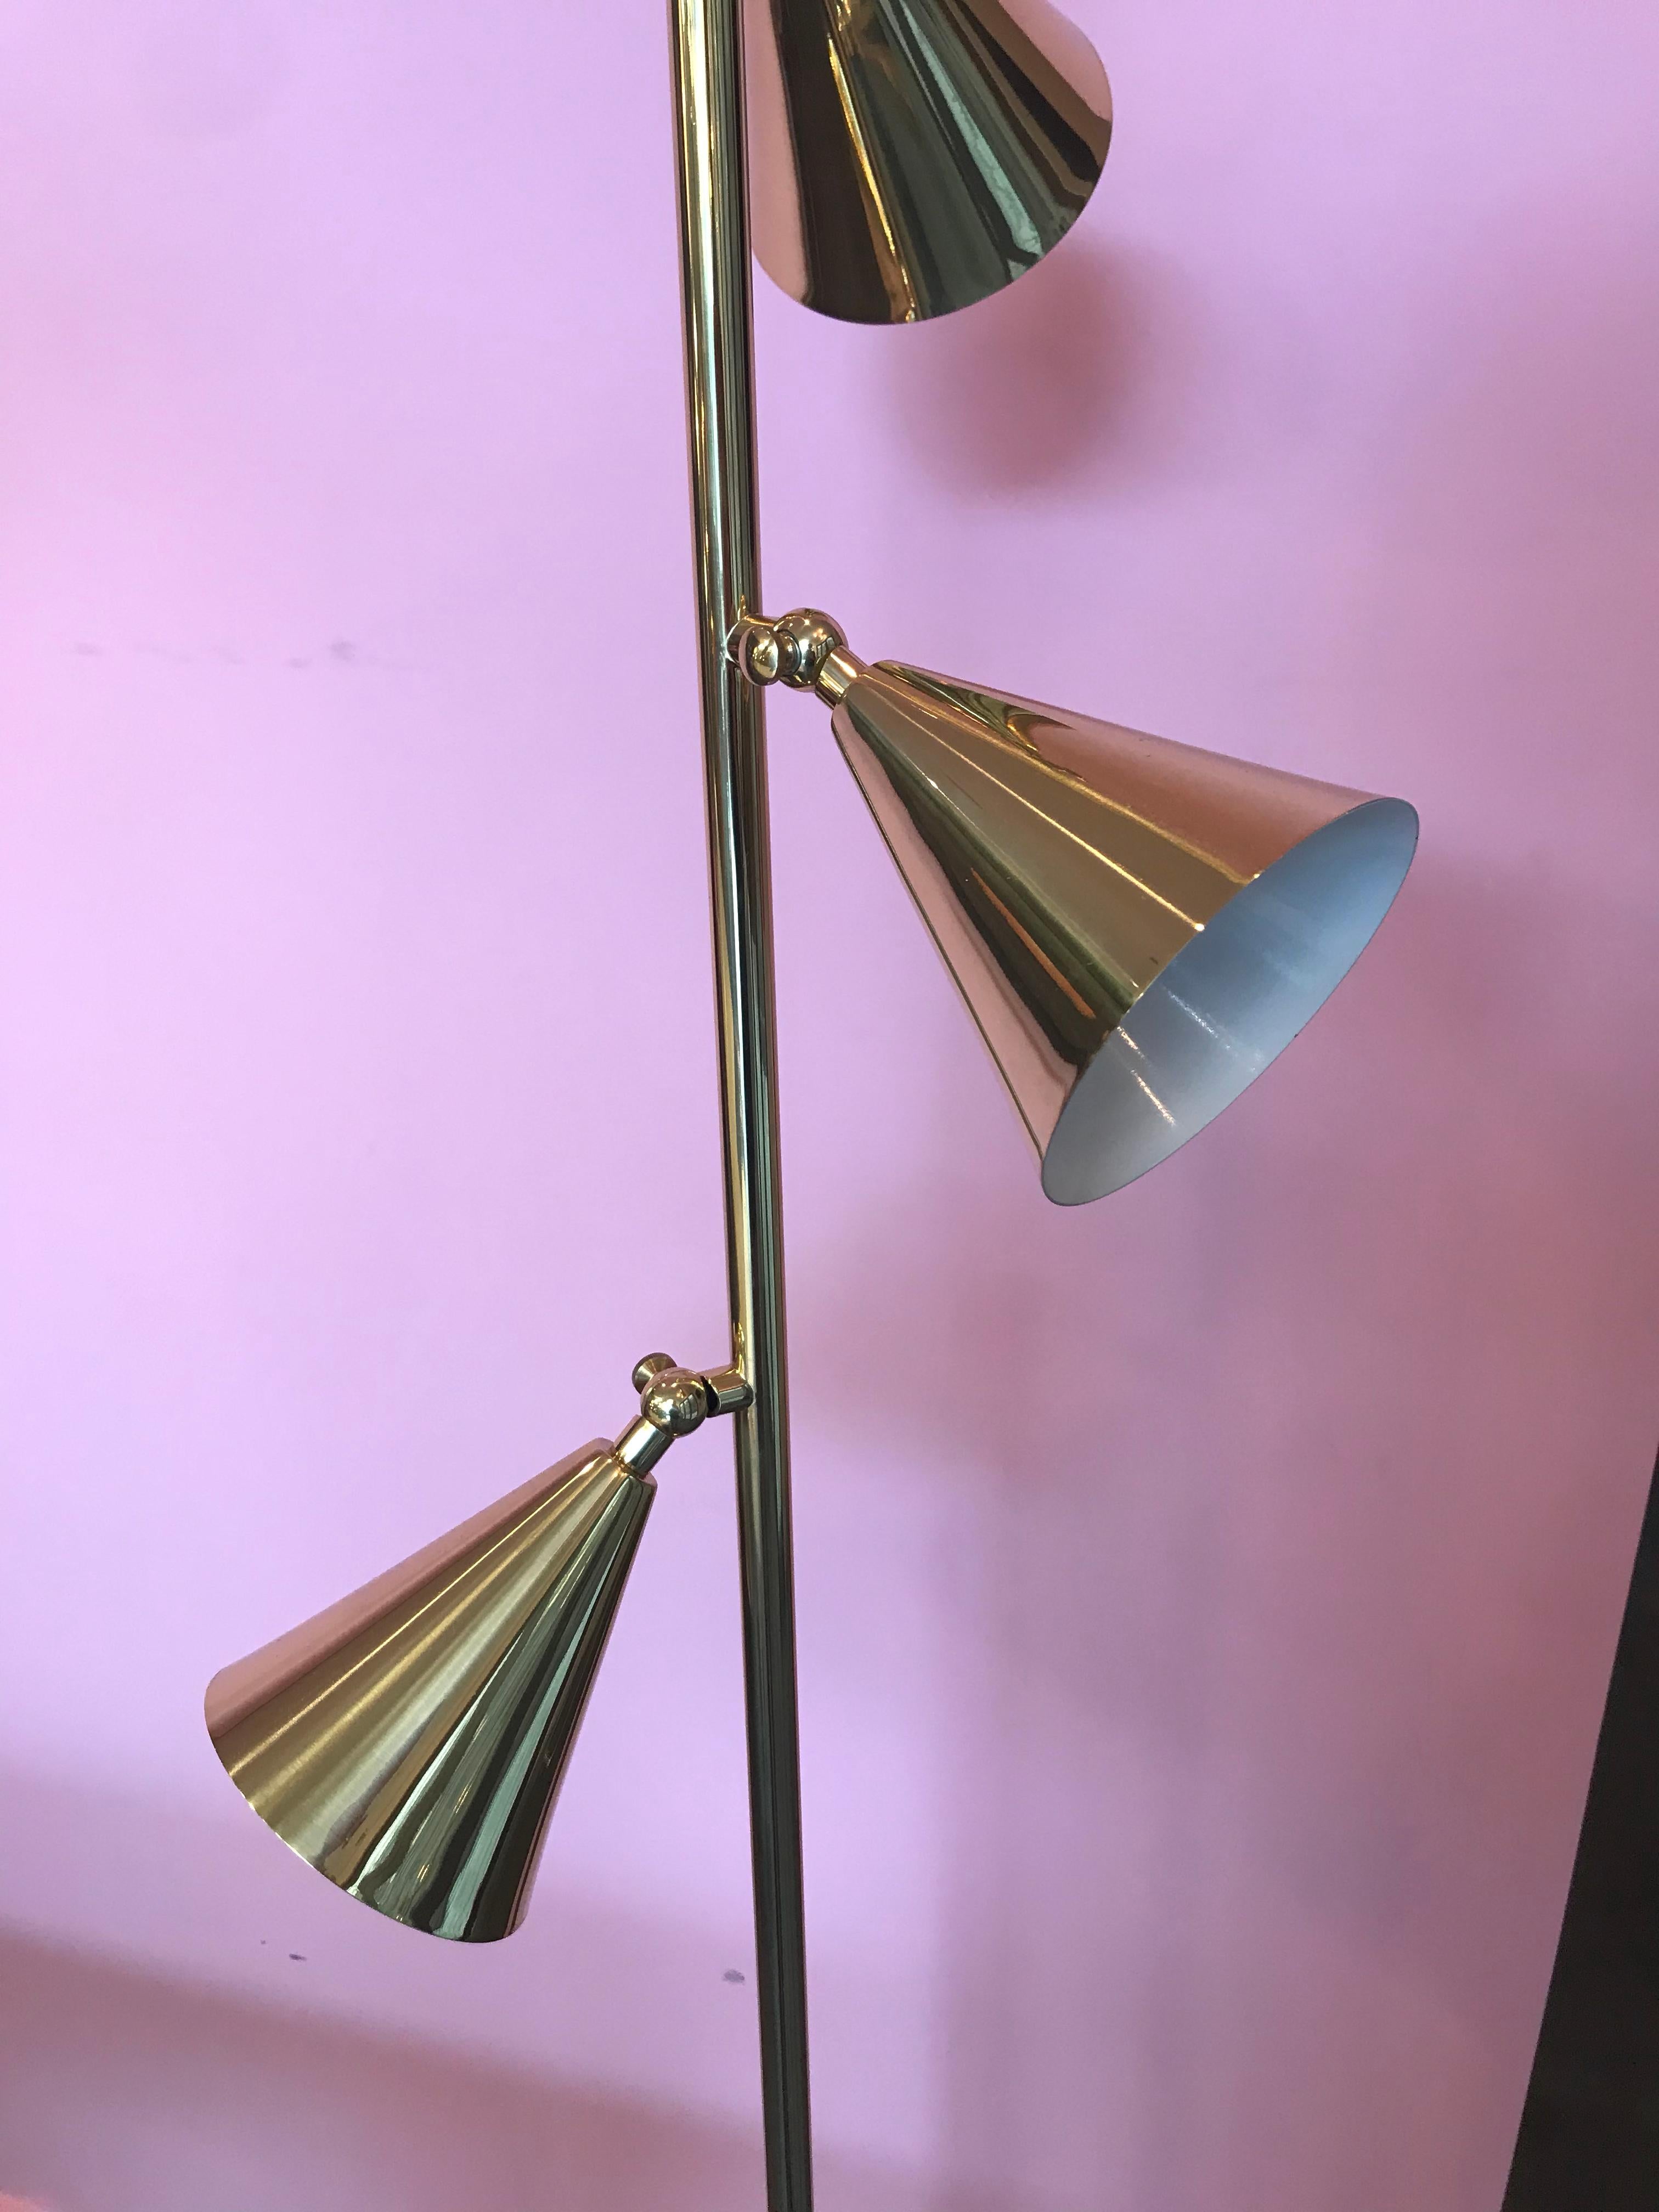 Flora- co - floor lamp in polished or oxidized brass with contemporary and delicate design. The reflectors are articulated allowing light to be directed. Uses G9 base lamp
Código: C26.
 